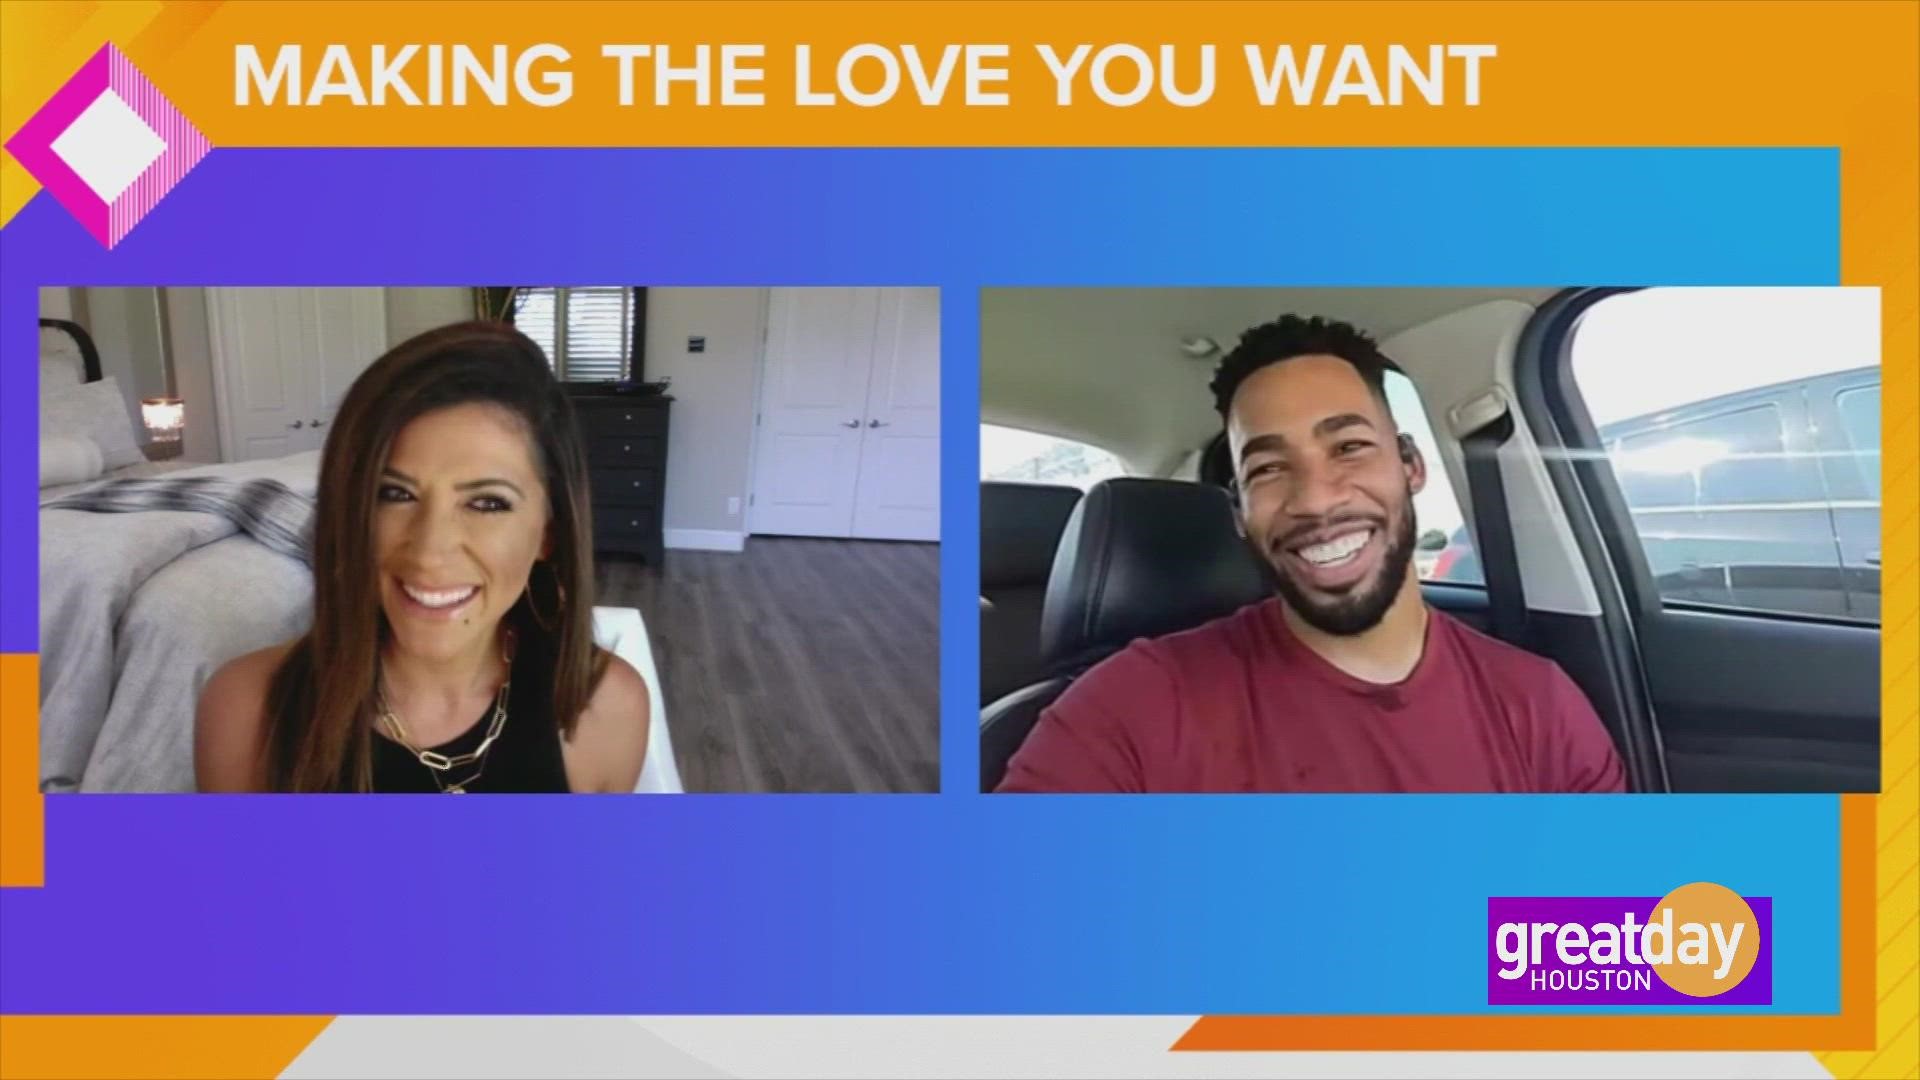 Mike Johnson from "The Bachelorette" talks about his search for love and how he is helping others find the love they want